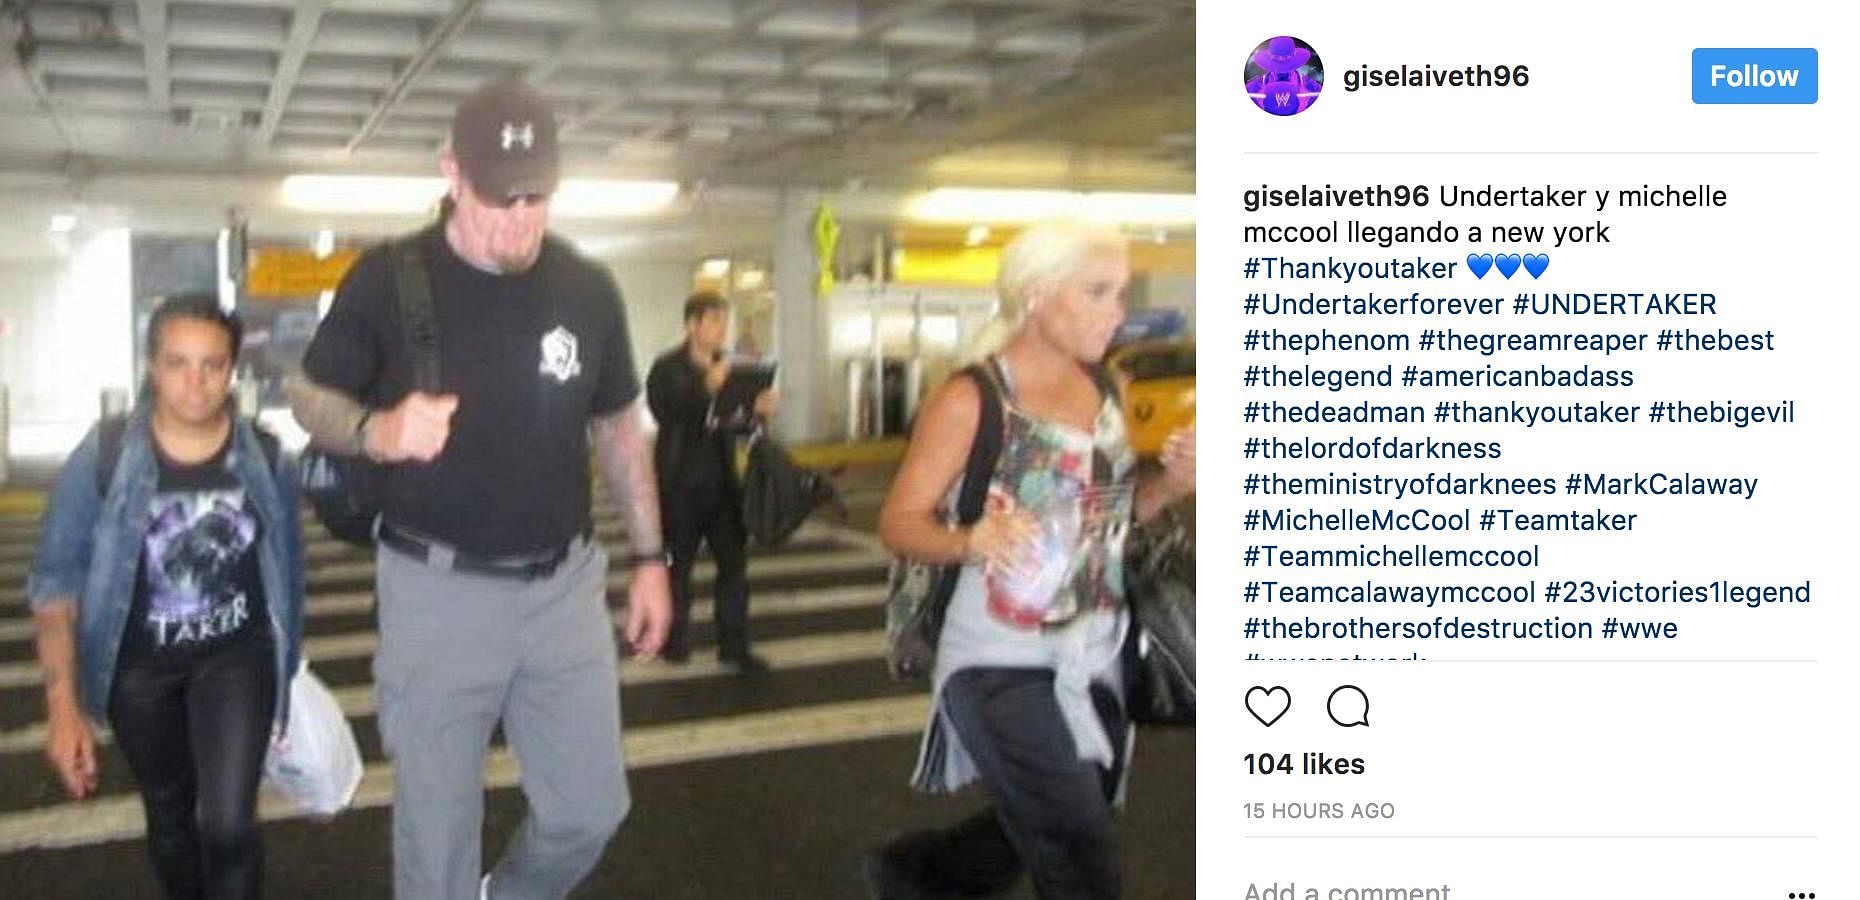 The Undertaker with his wife Michelle Mccool in New York